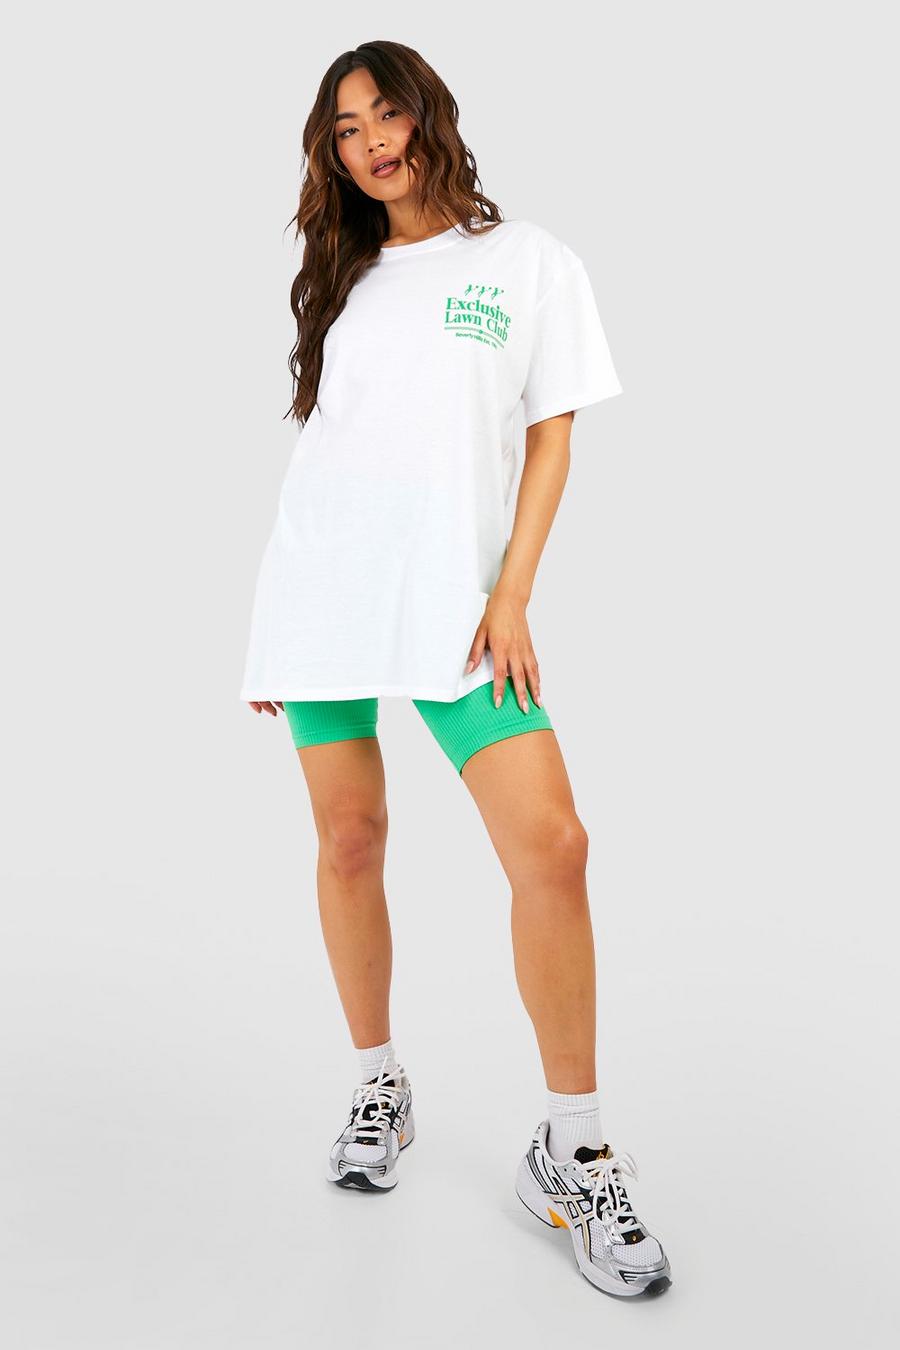 White Lawn Club Oversize t-shirt med tryck